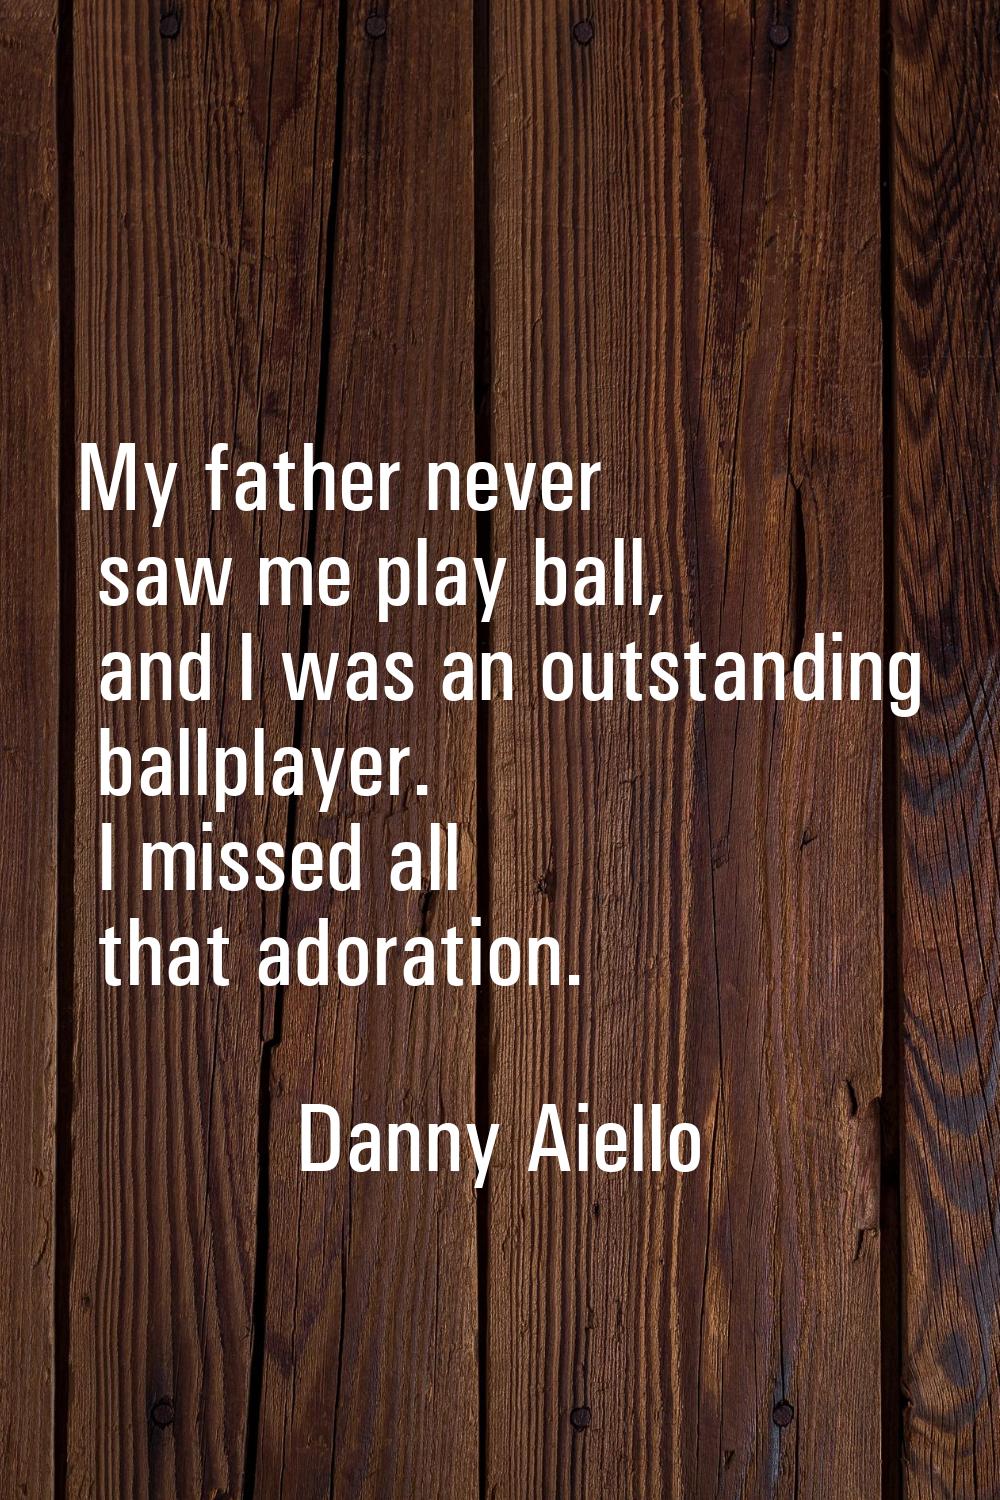 My father never saw me play ball, and I was an outstanding ballplayer. I missed all that adoration.